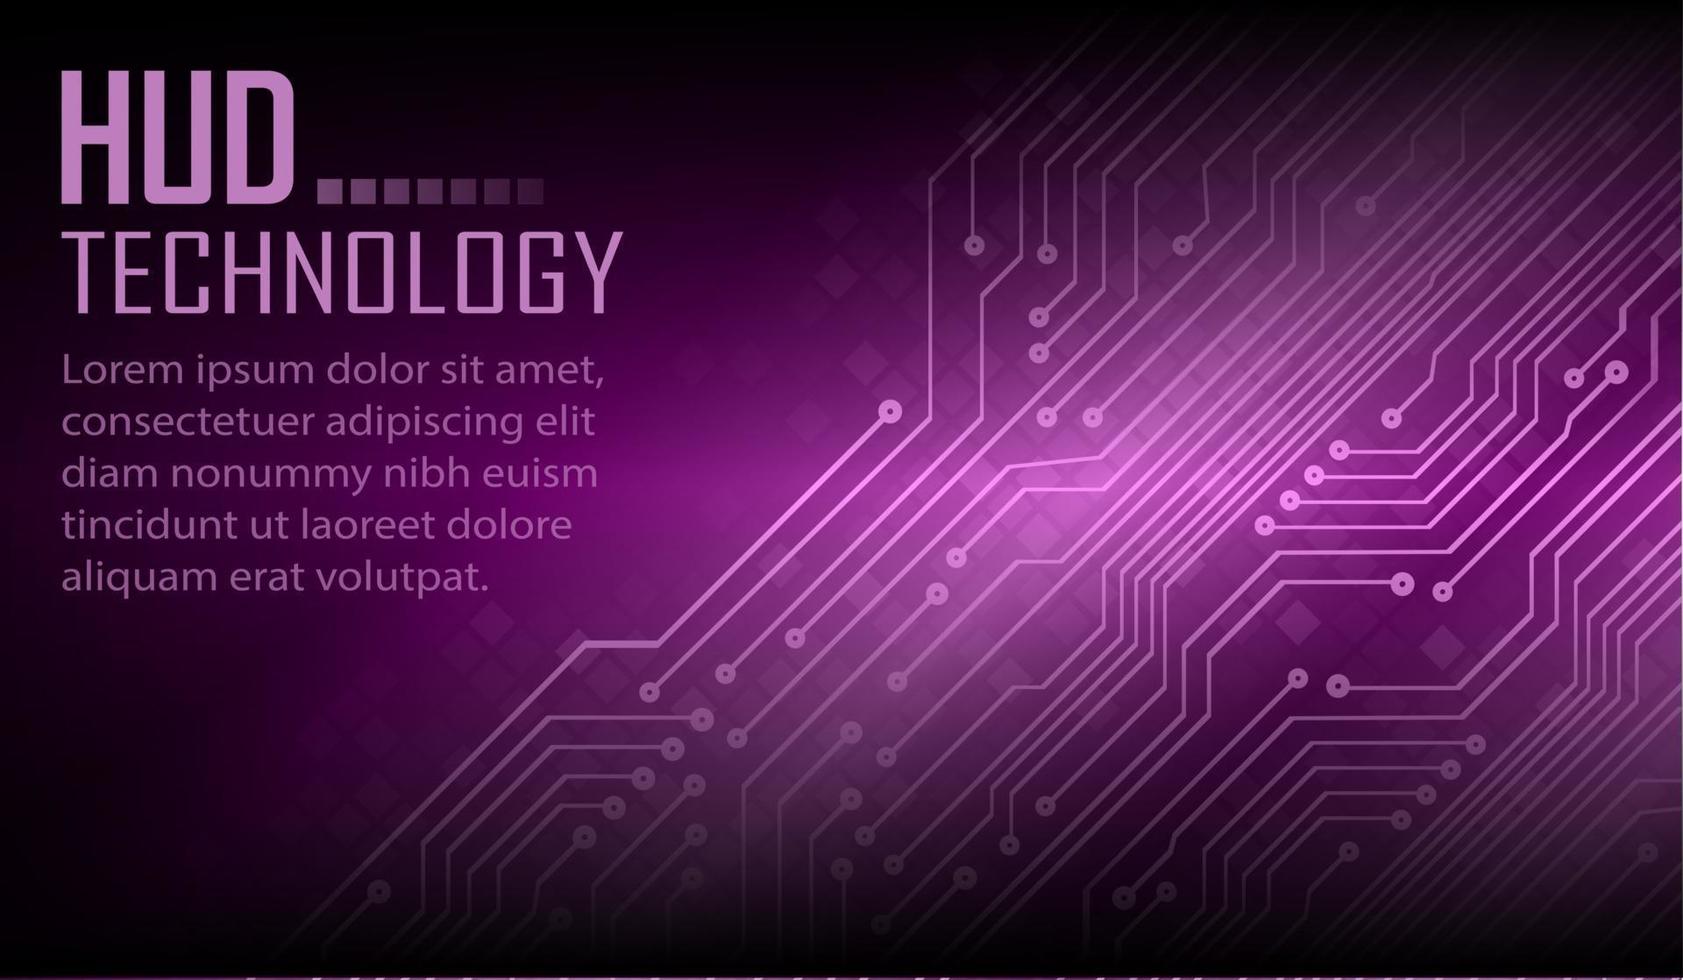 Printcyber circuit future technology concept background vector